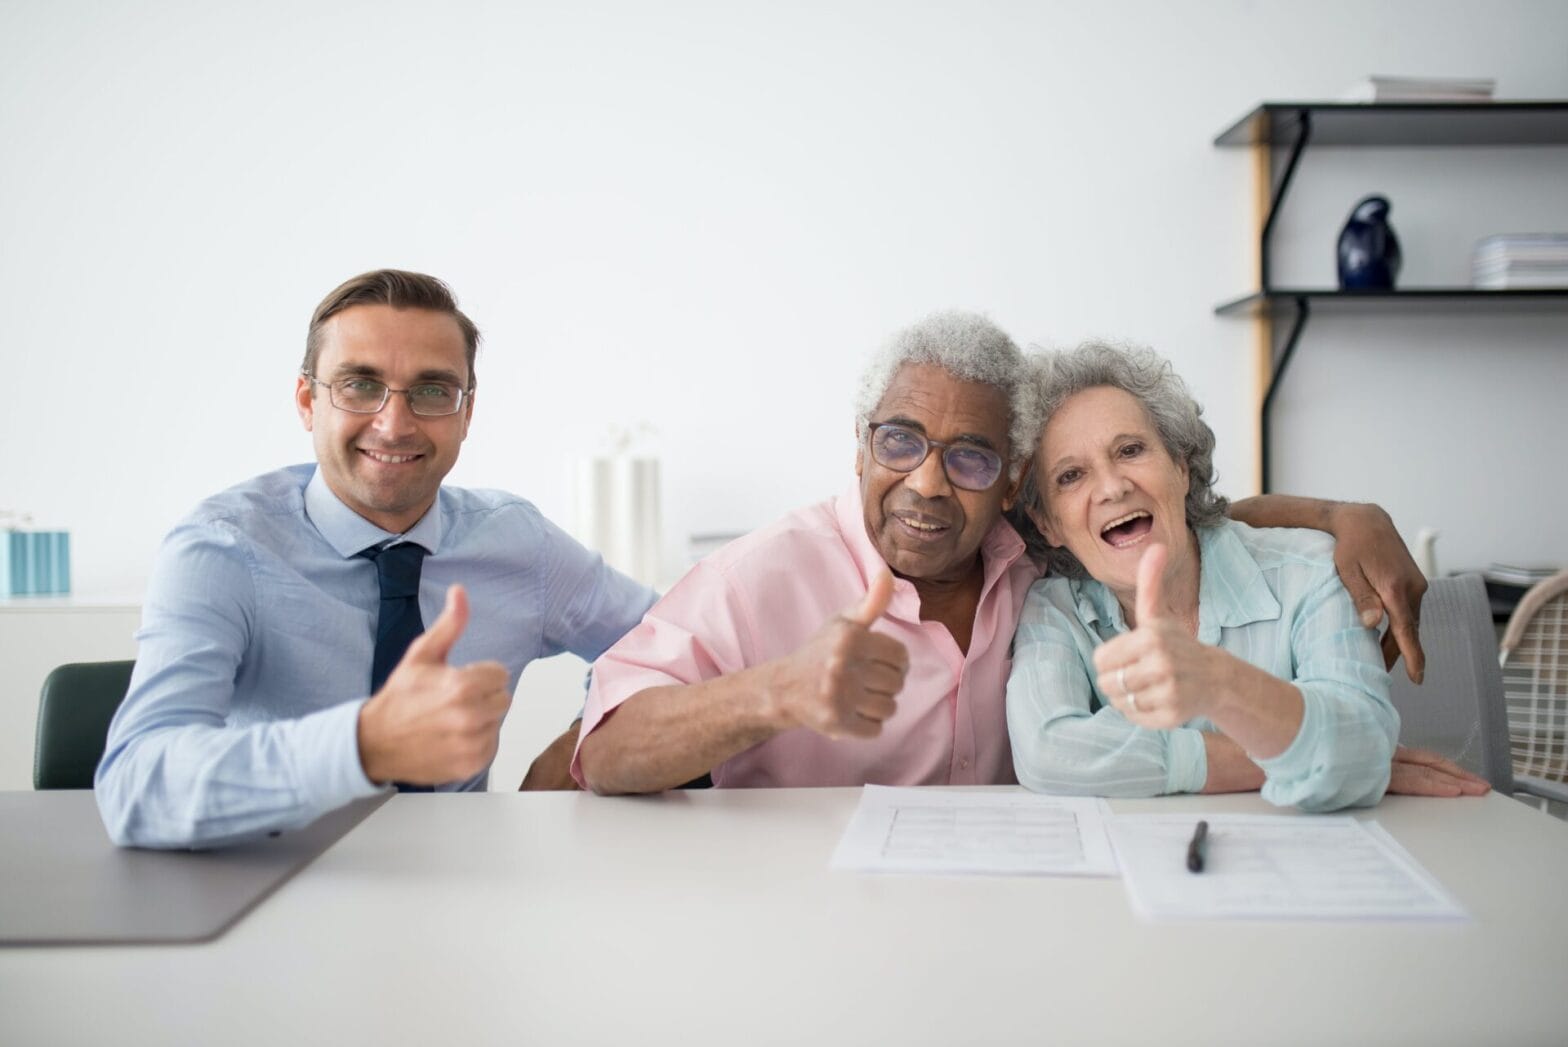 Elderly people smiling with thumbs up